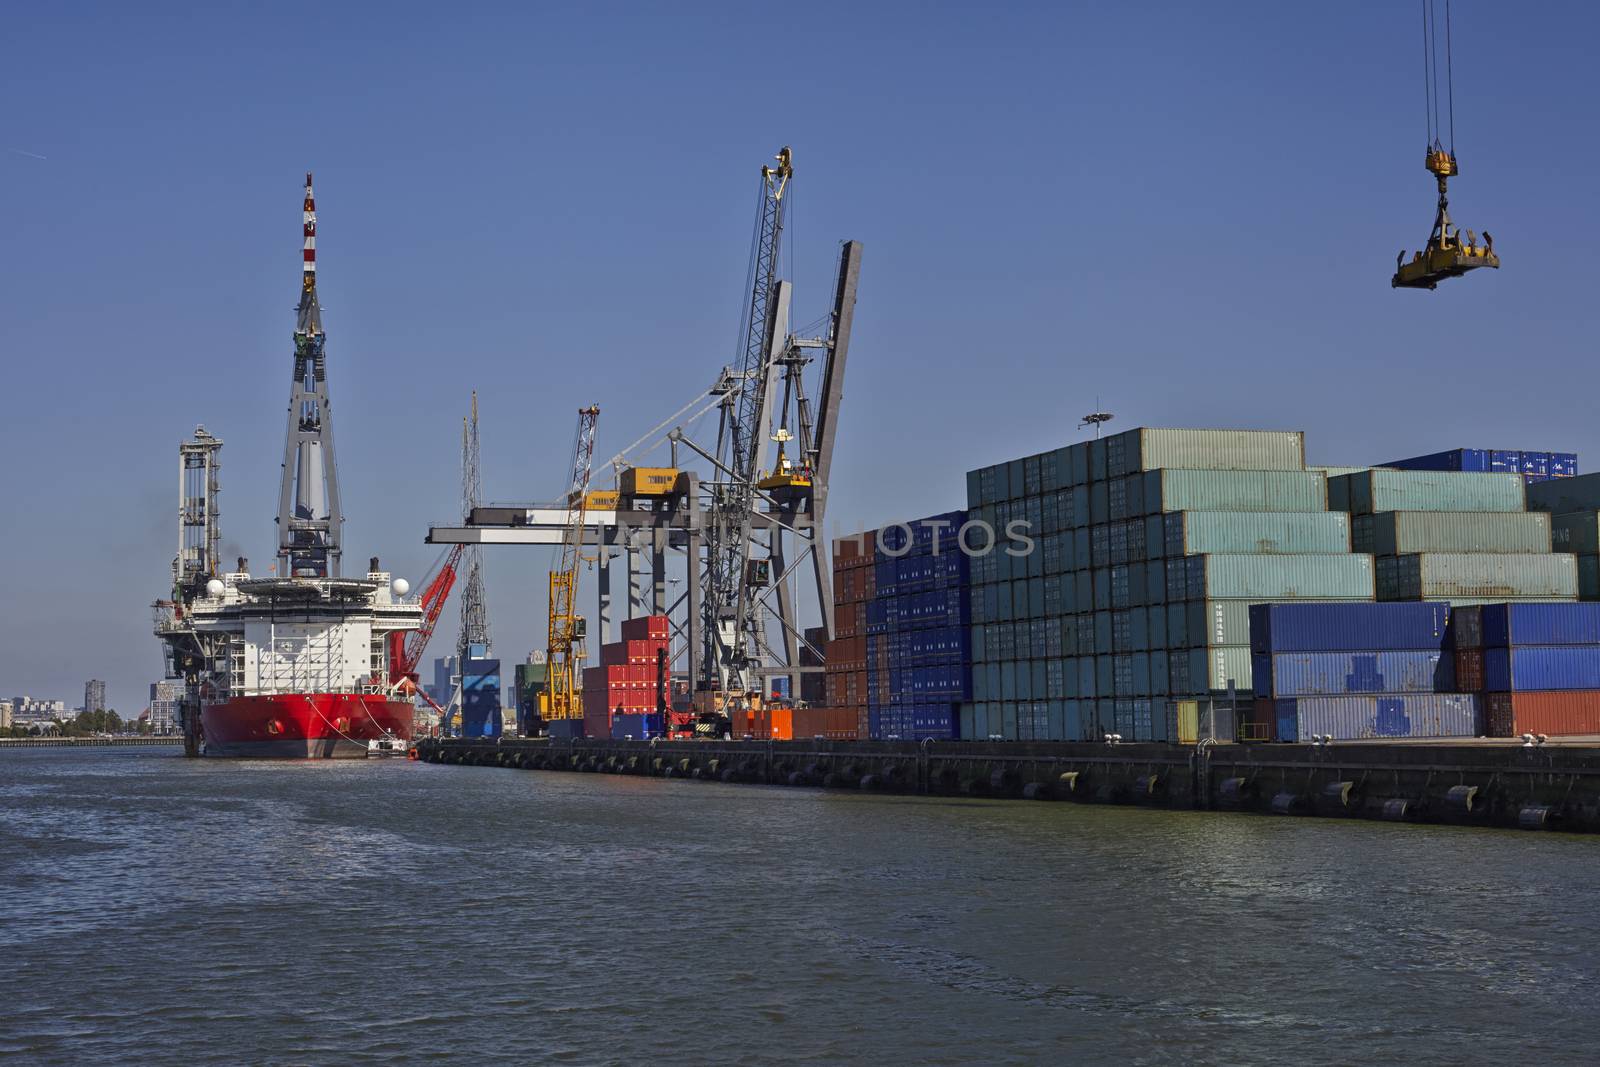 Large harbor cranes loading a large container ship in the port of Rotterdam.
